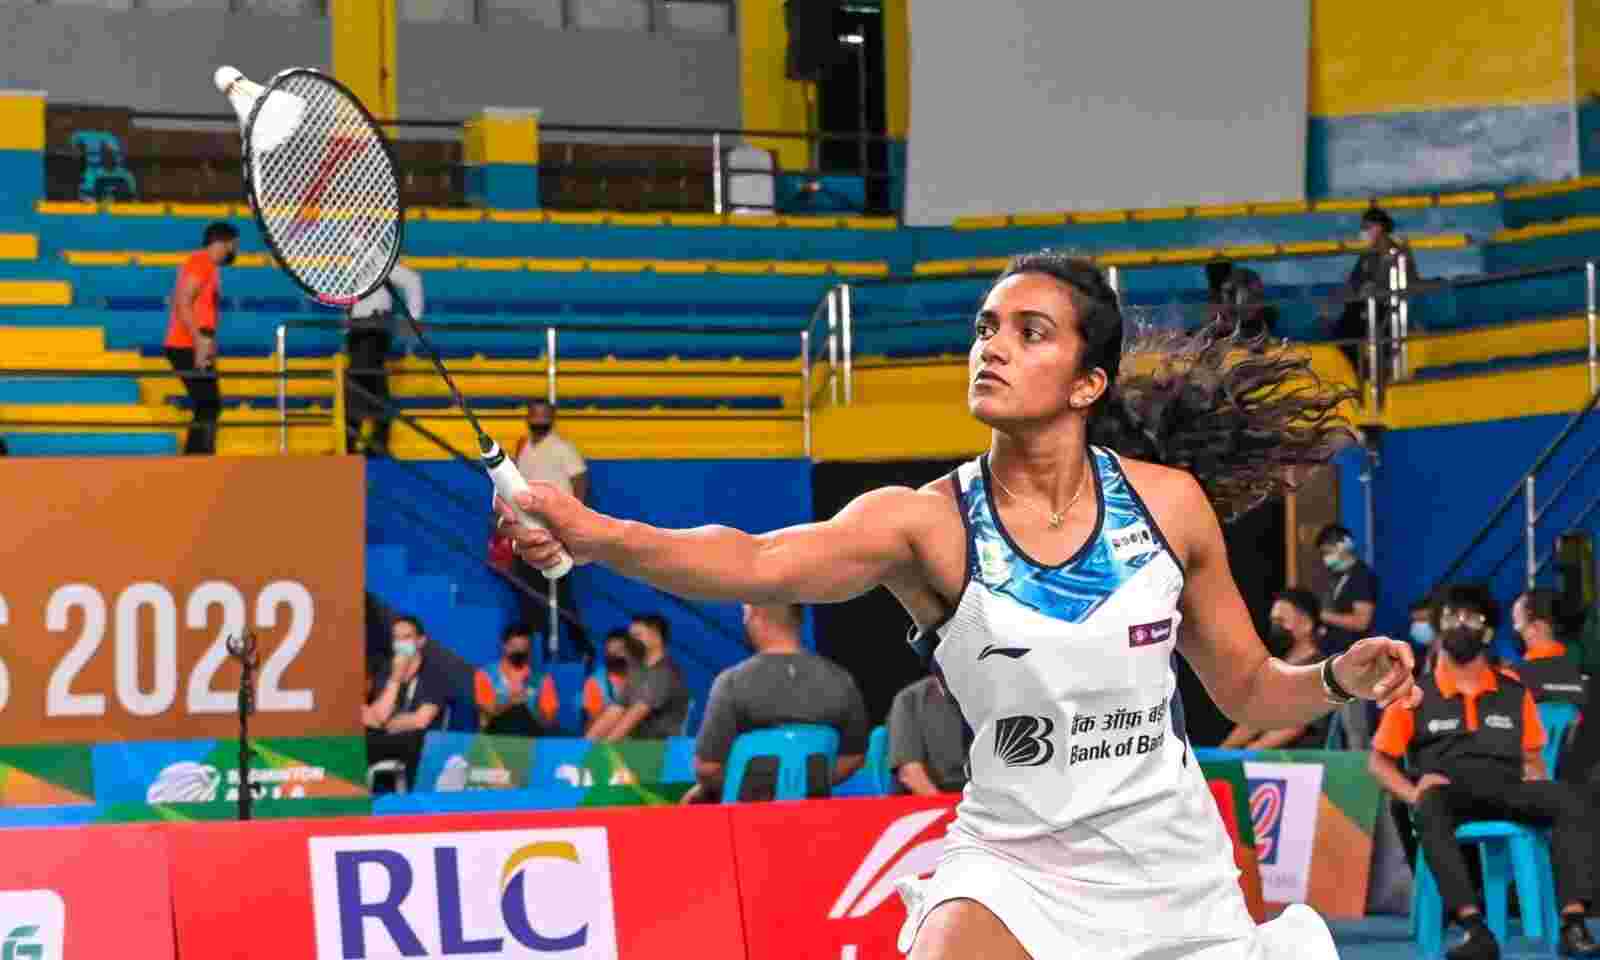 Singapore Open 2022 Finals LIVE PV Sindhu crowned Champion